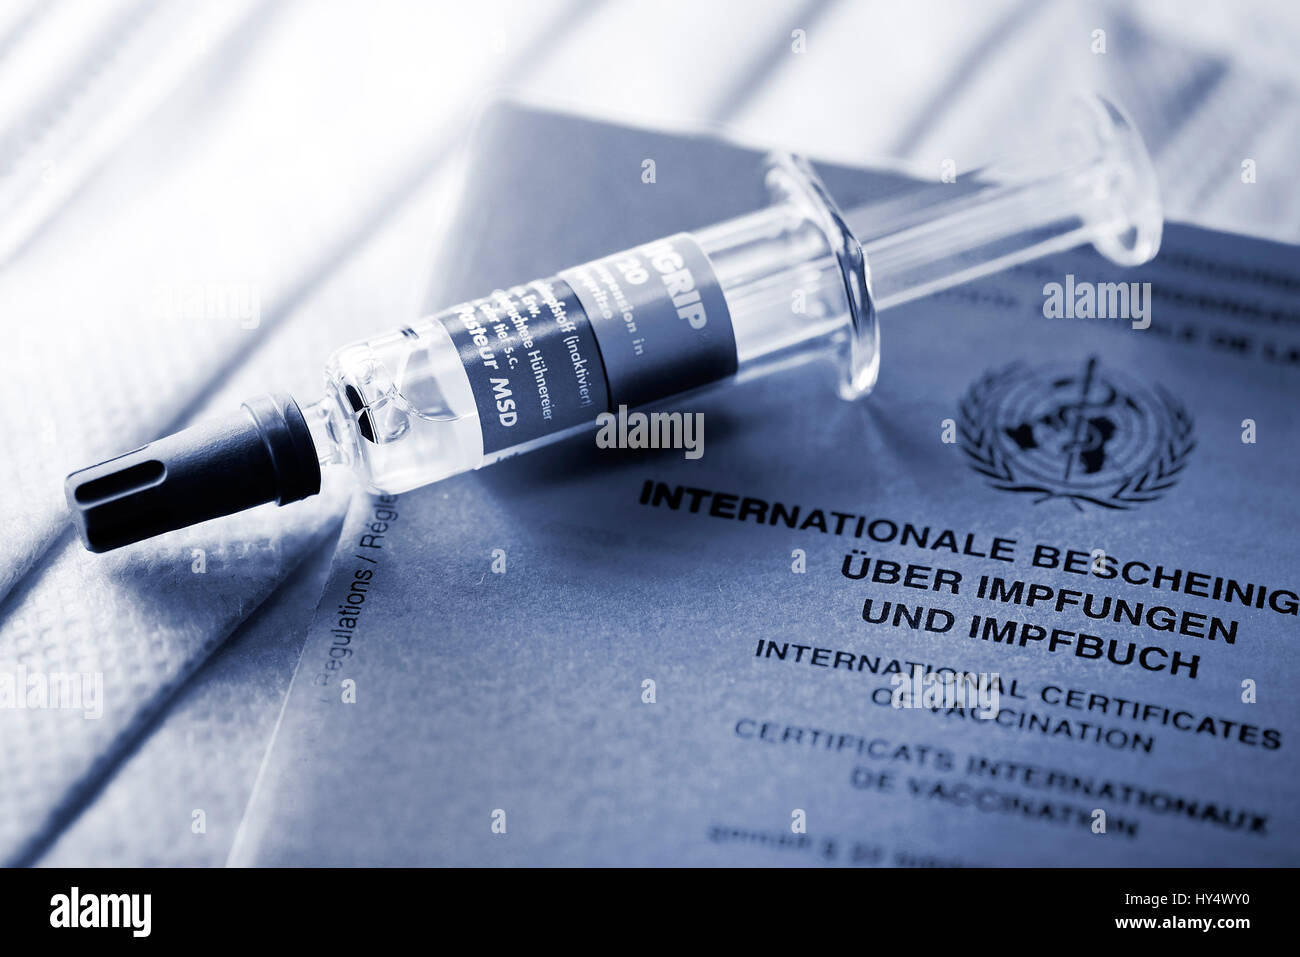 Vaccination identity card and vaccination syringe, Impfausweis und Impfspritze Stock Photo